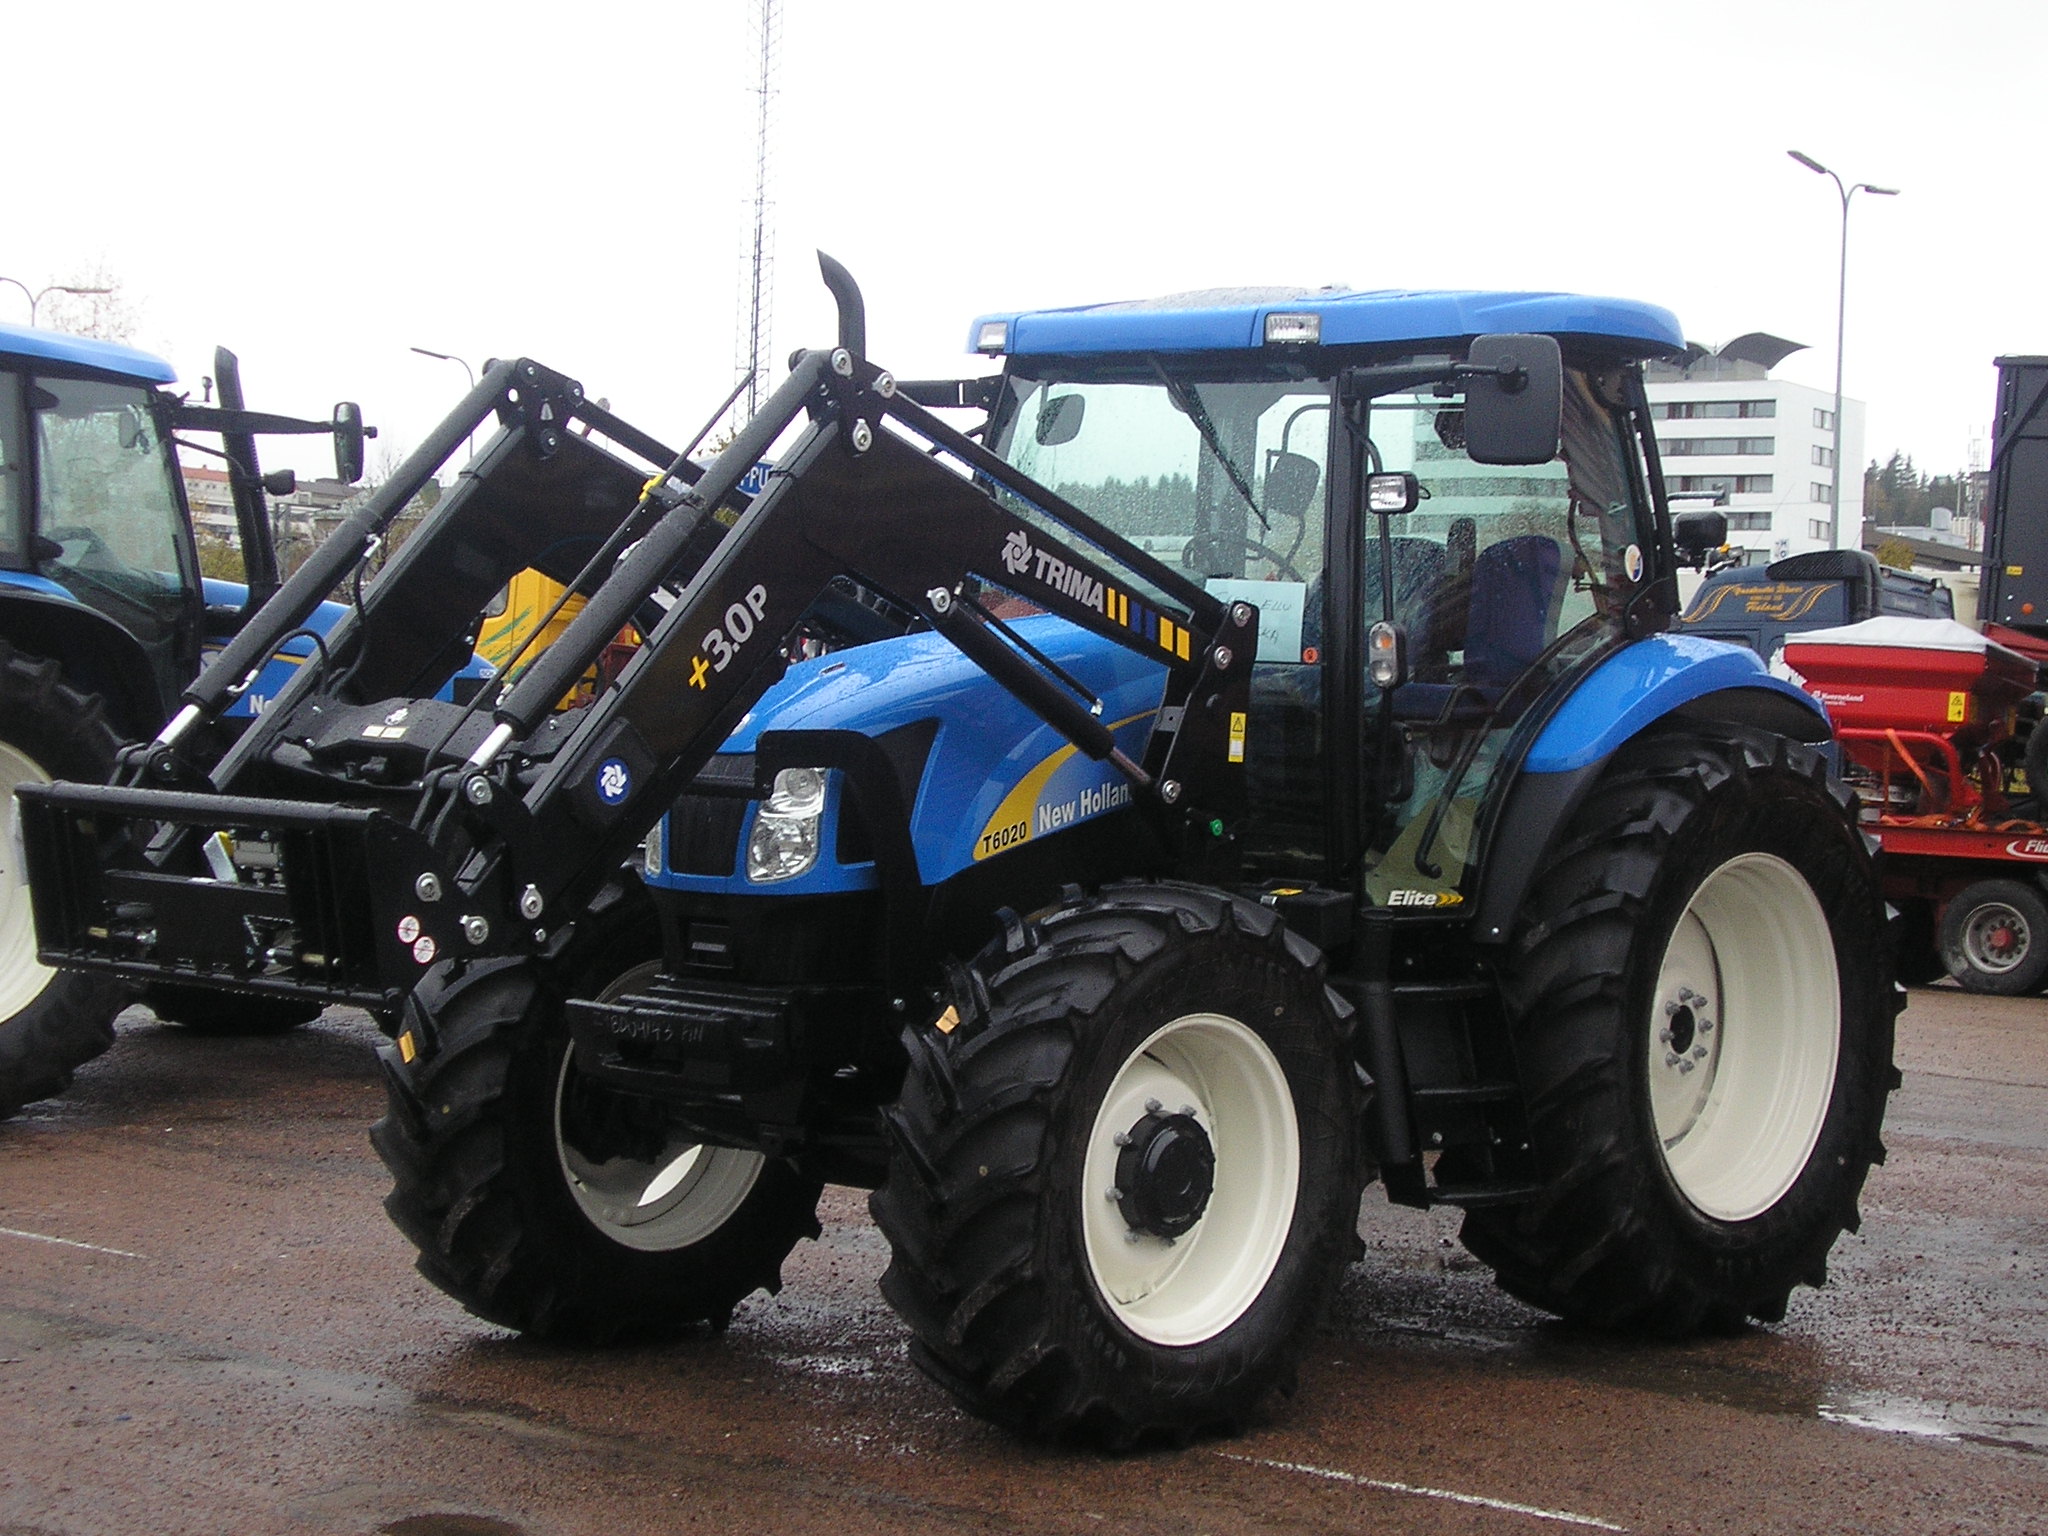 File:New Holland T6020 tractor.jpg - Wikimedia Commons